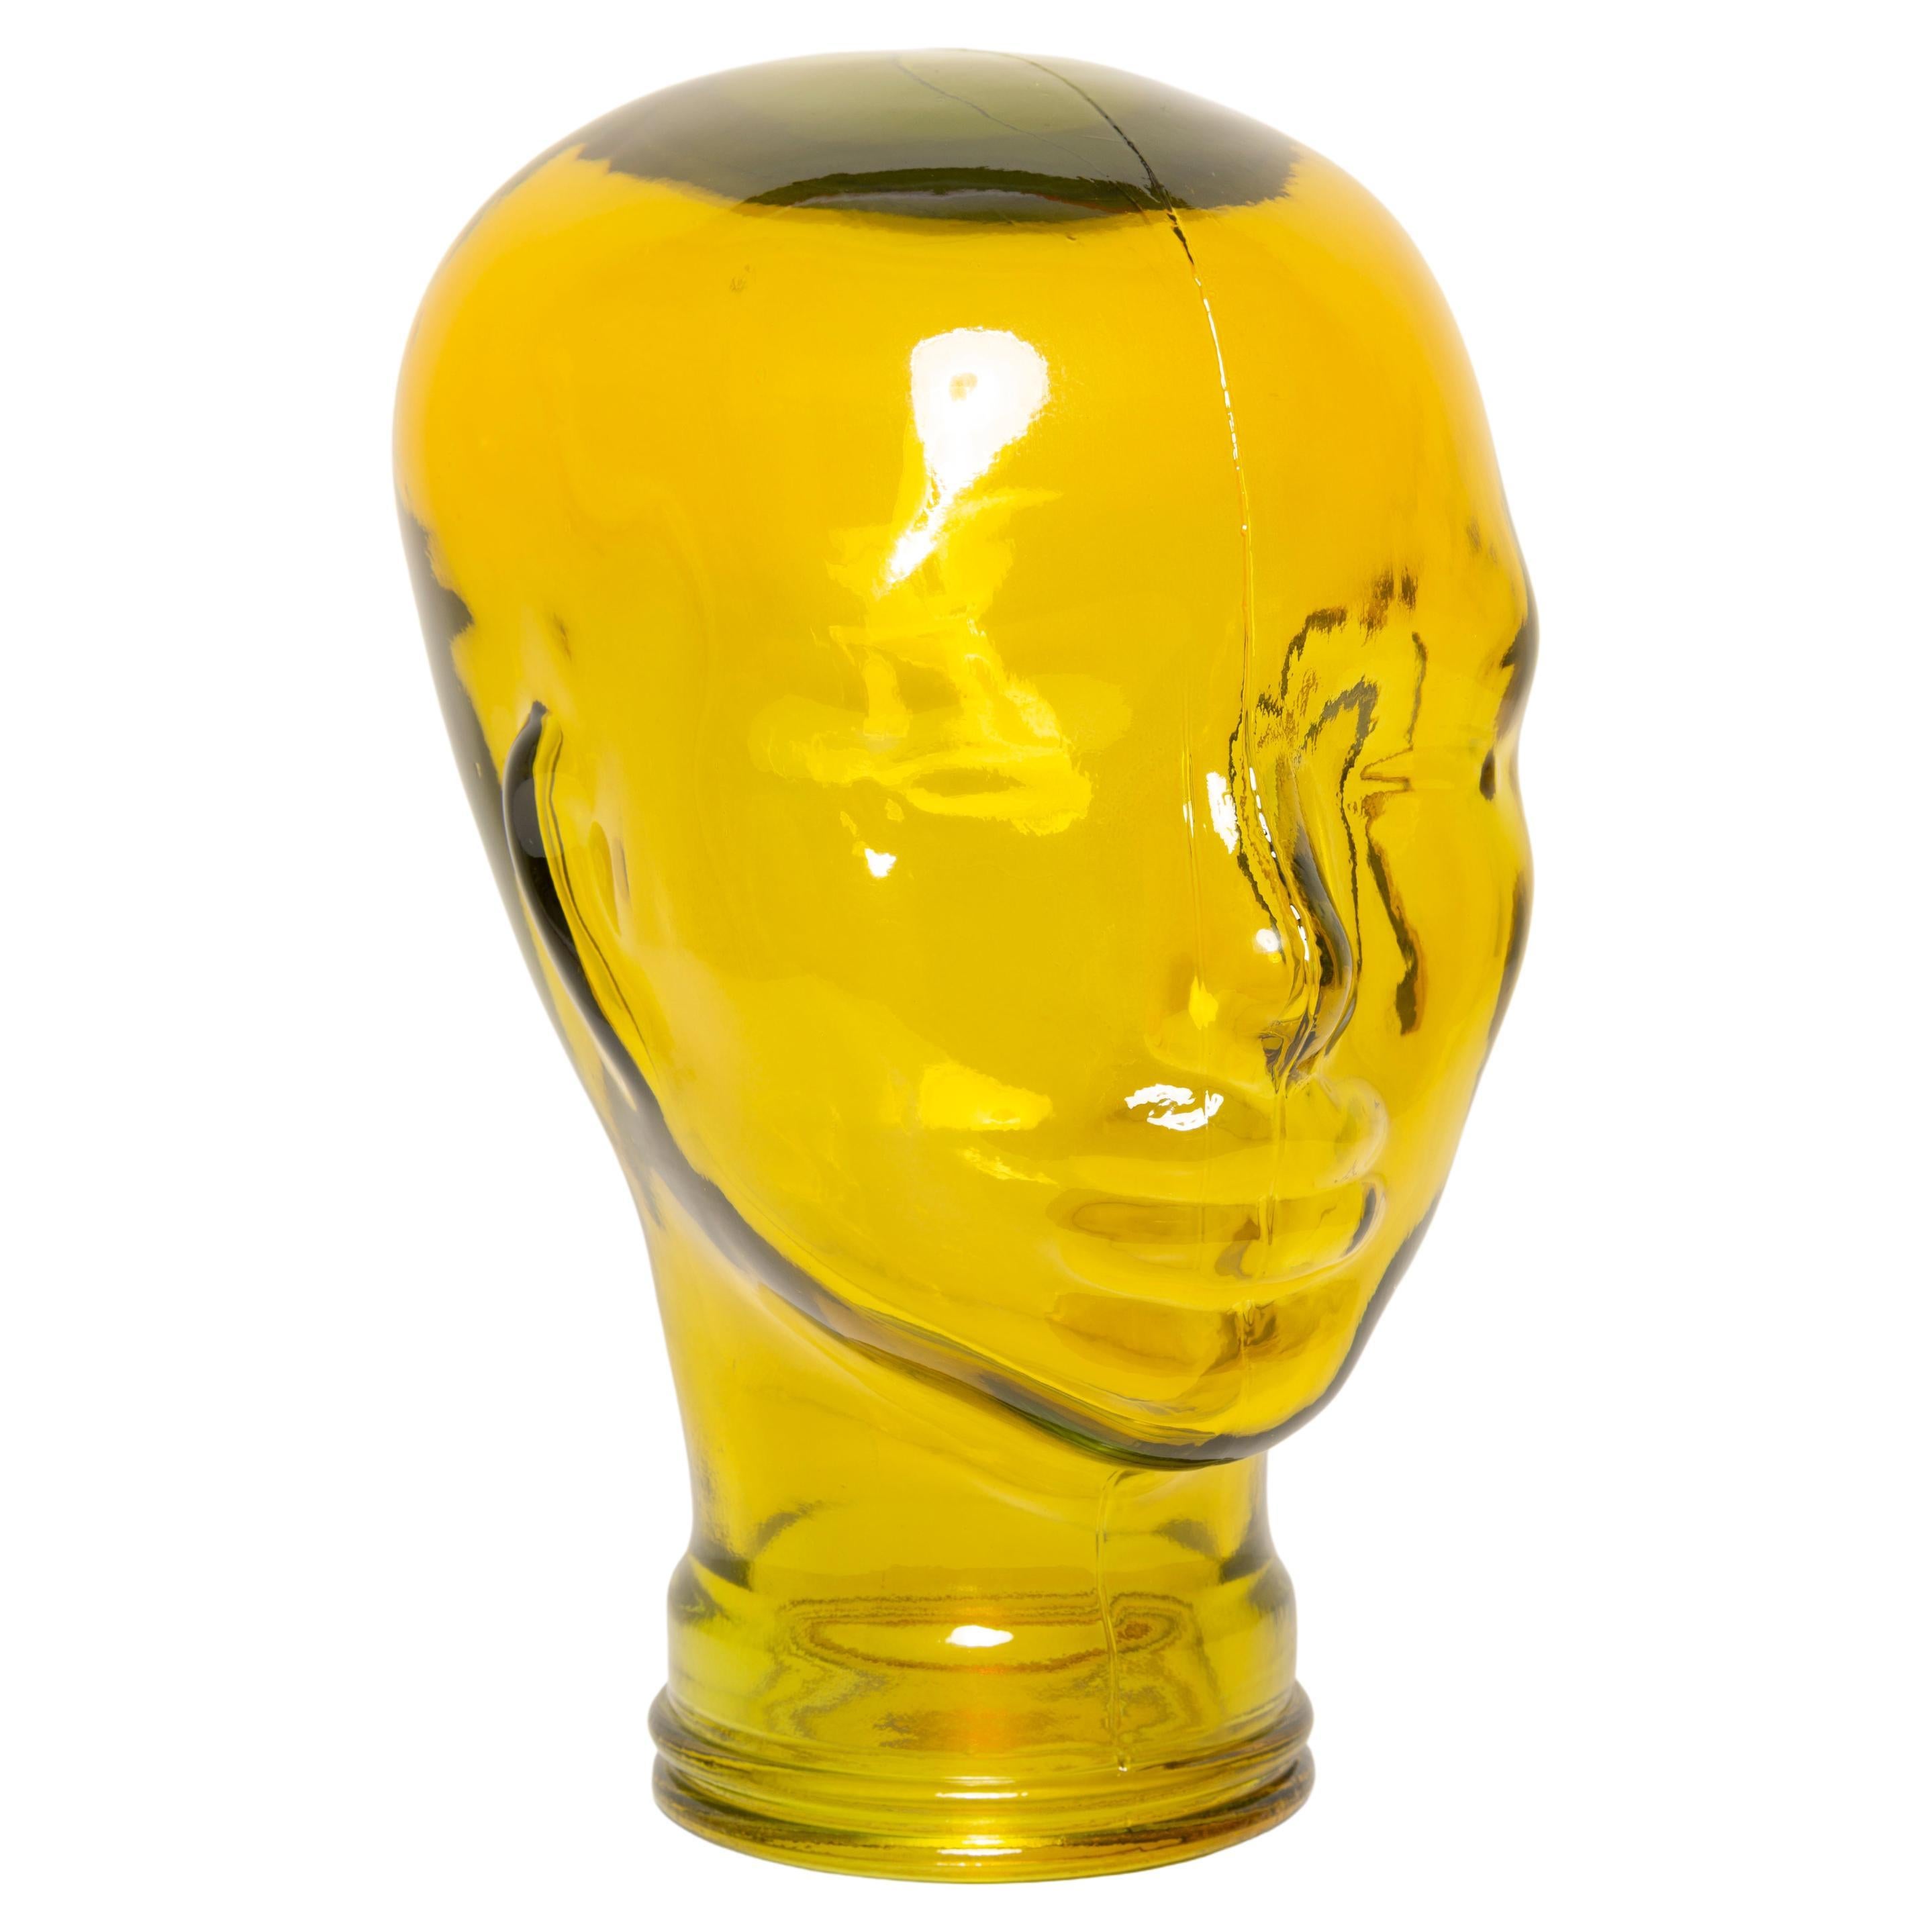 Yellow Vintage Decorative Mannequin Glass Head Sculpture, 1970s, Germany For Sale